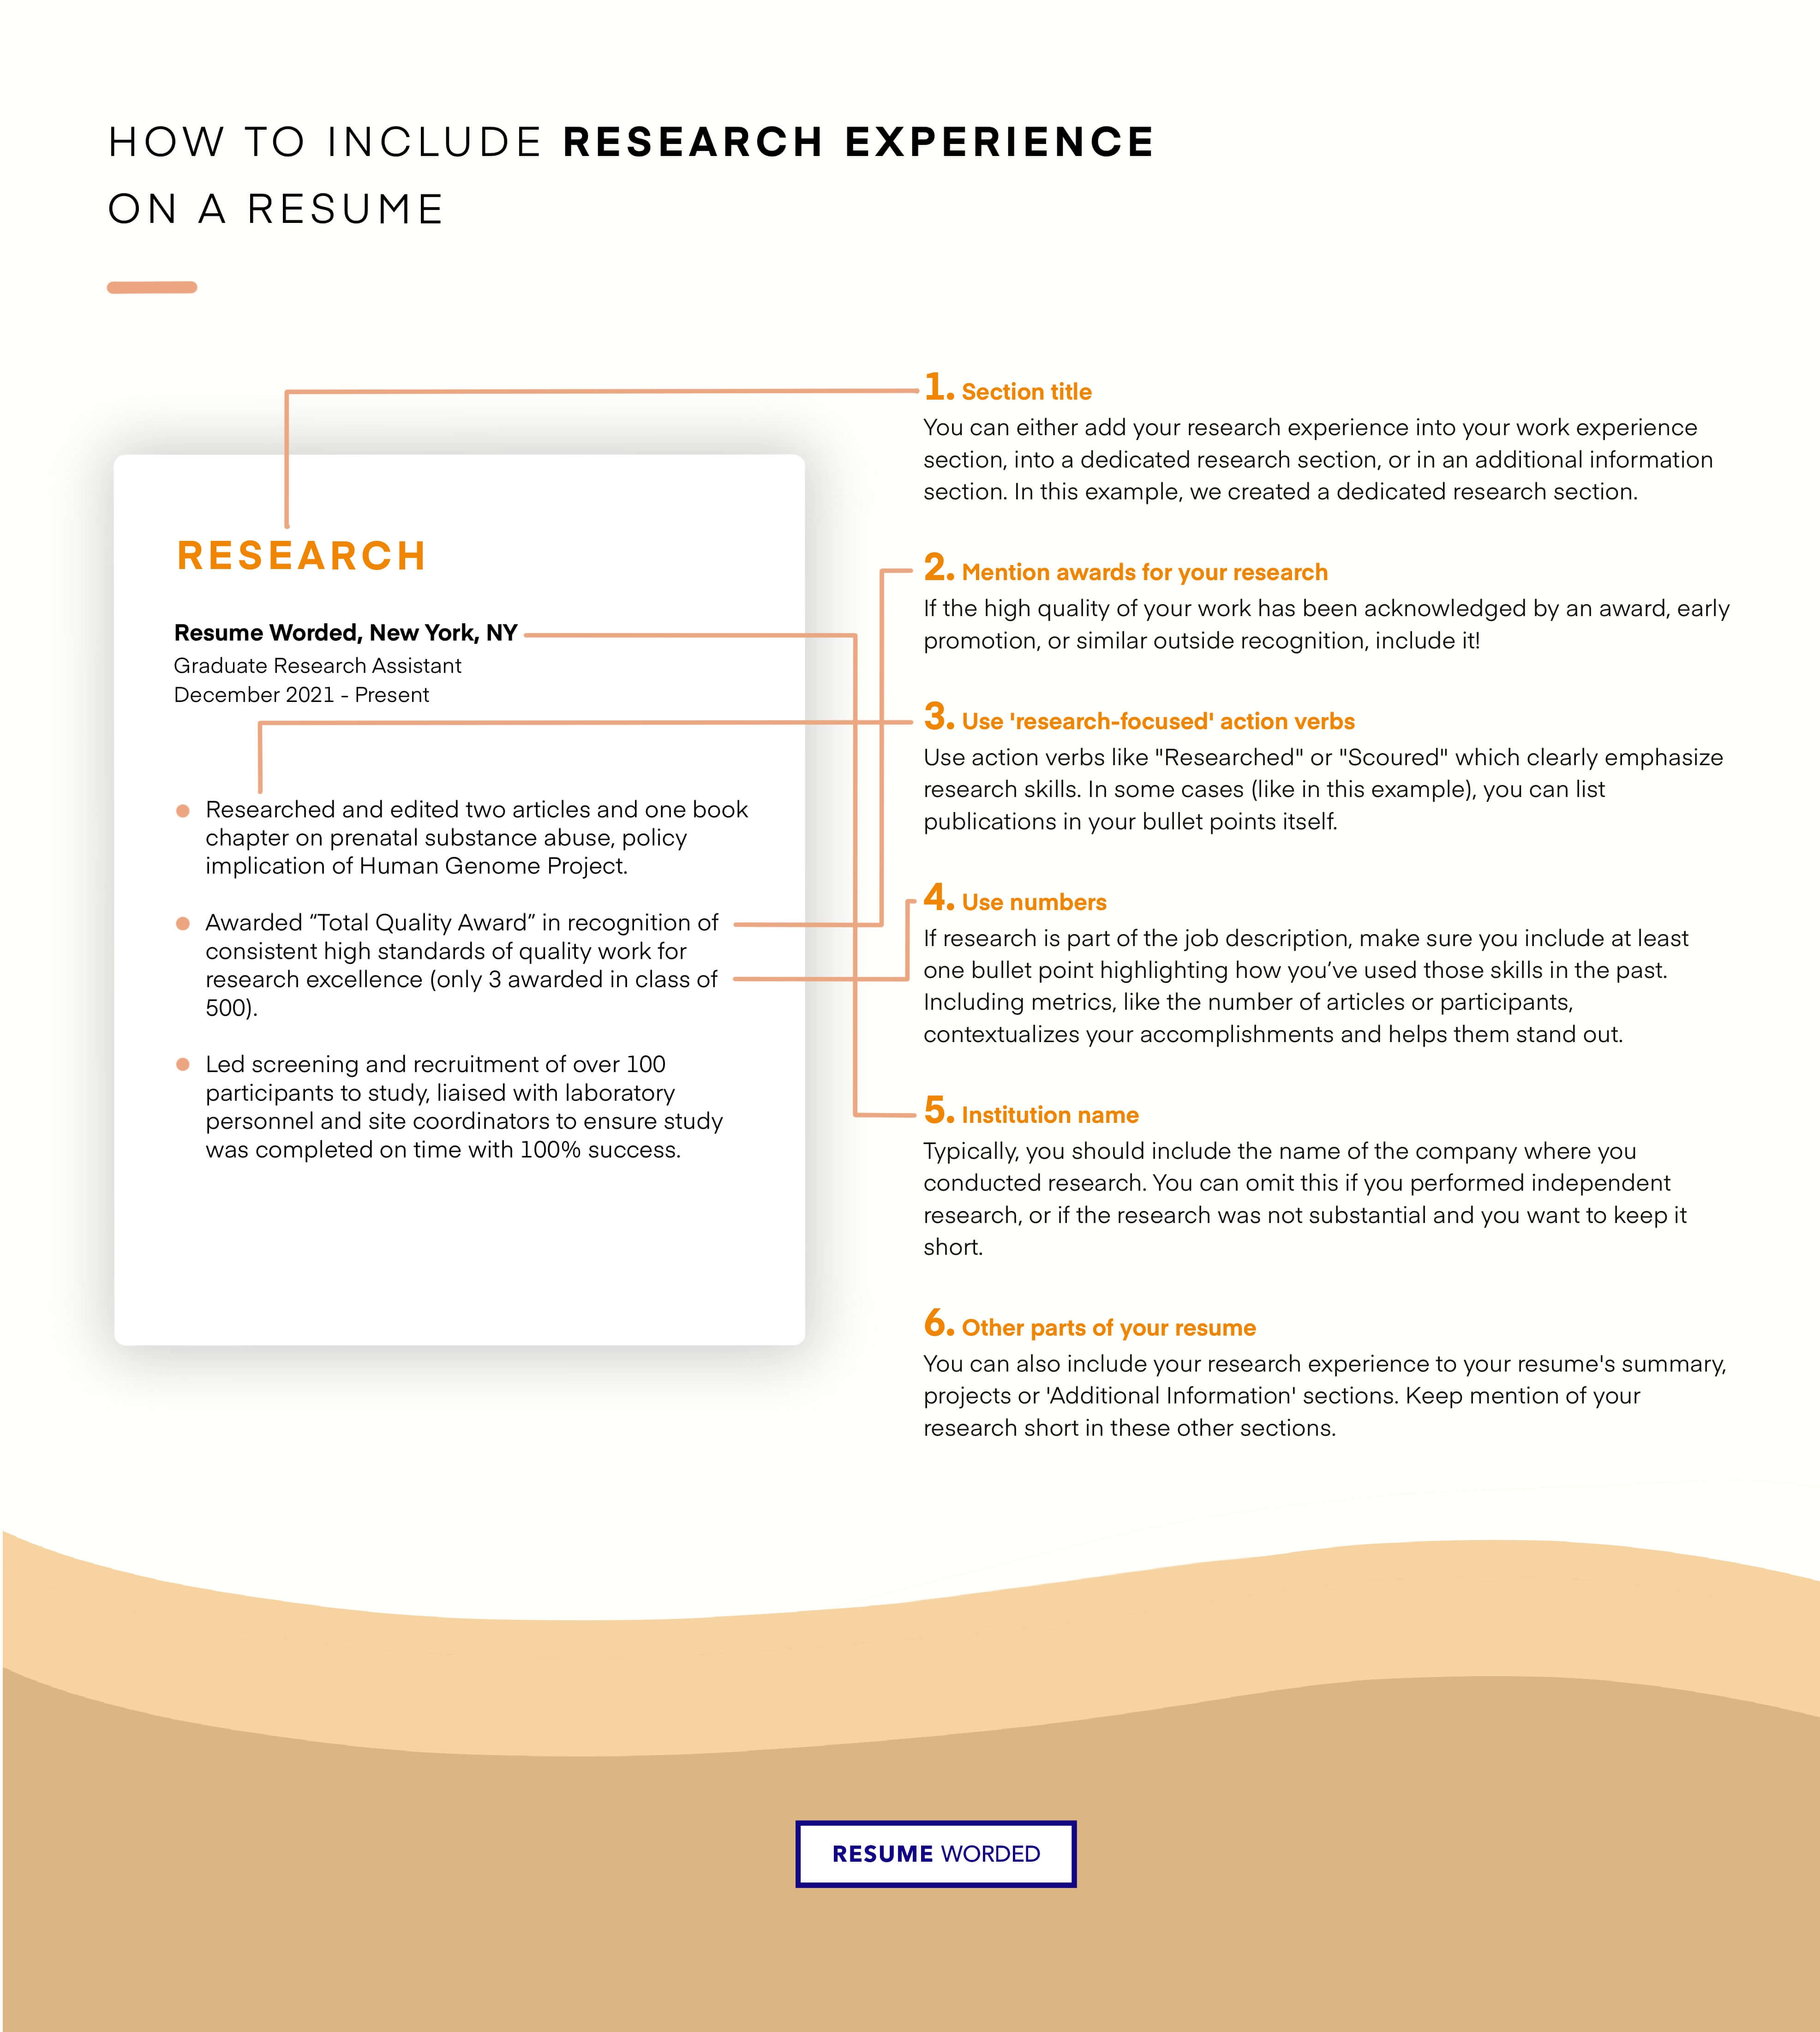 Show your passion for research - Undergraduate Research Assistant CV